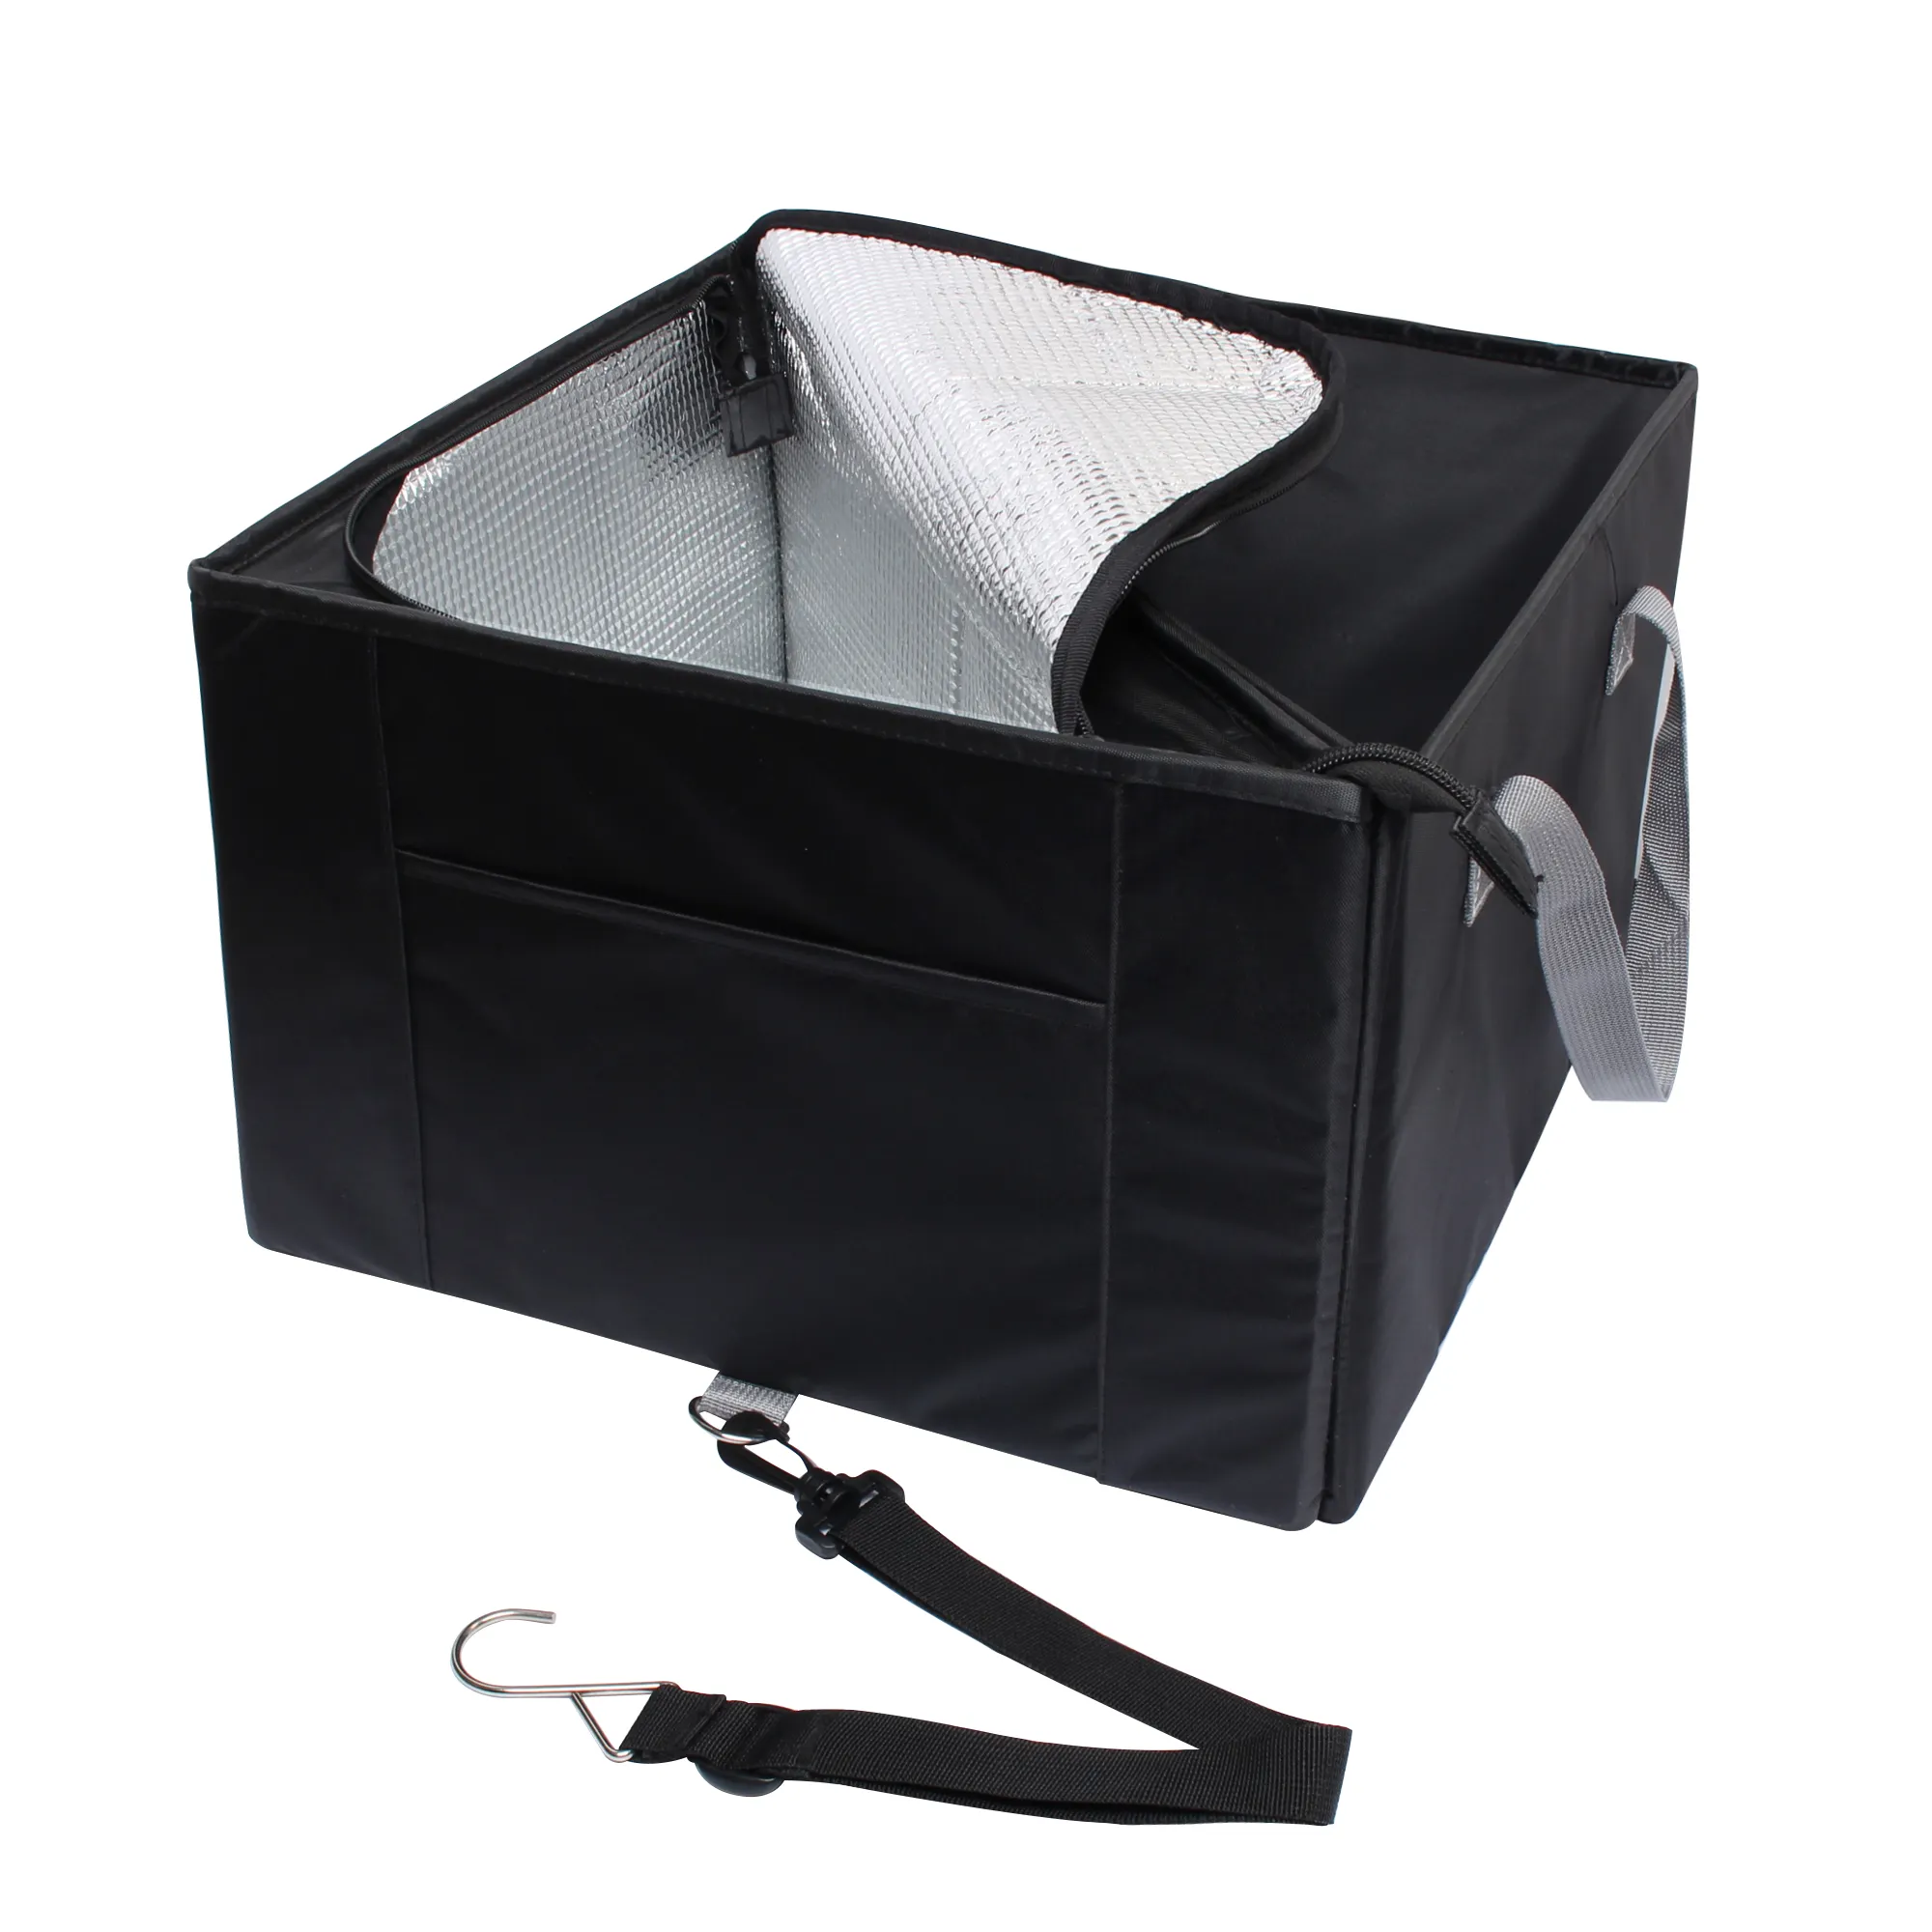 New Design Heavy Duty Collapsible Car Trunk Storage Organizer With Cooler